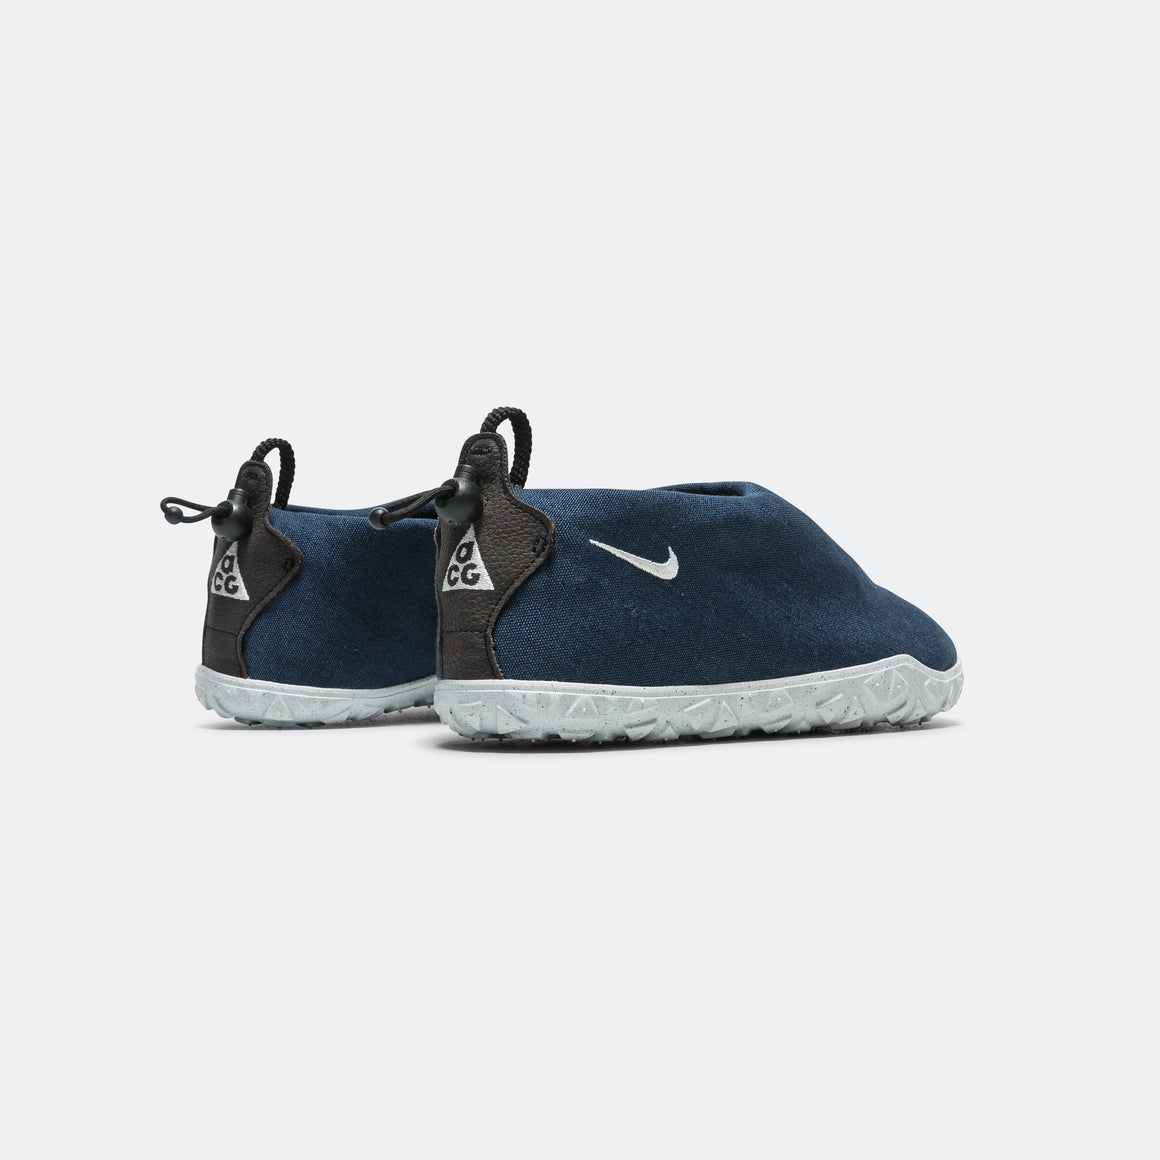 Nike ACG - Moc - Armory Navy/Sail-Black-University Red - UP THERE